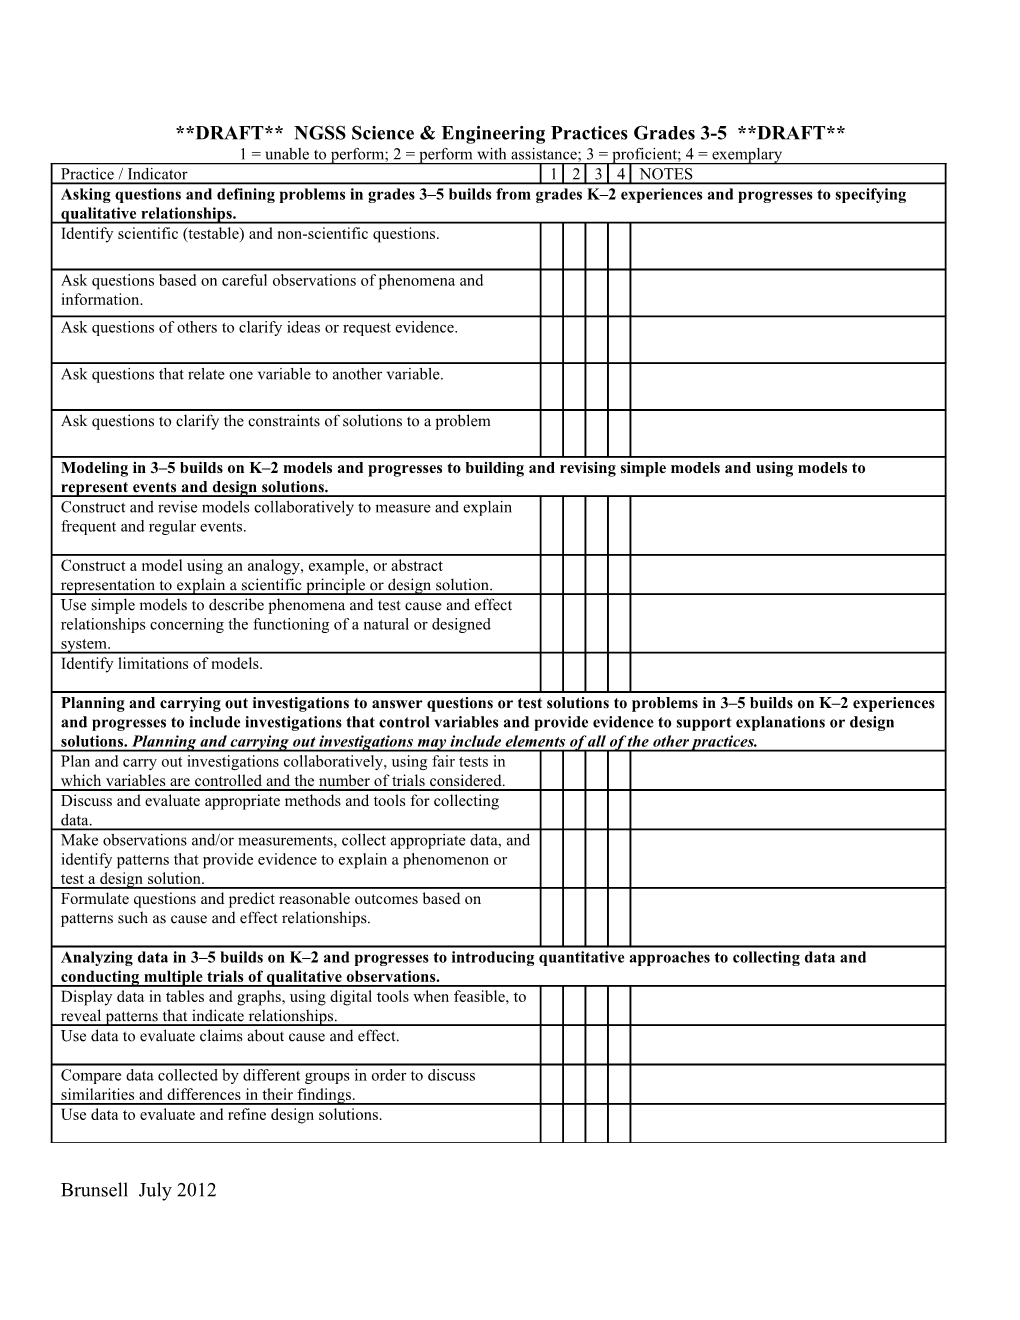 DRAFT NGSS Science & Engineering Practices Grades 3-5 DRAFT